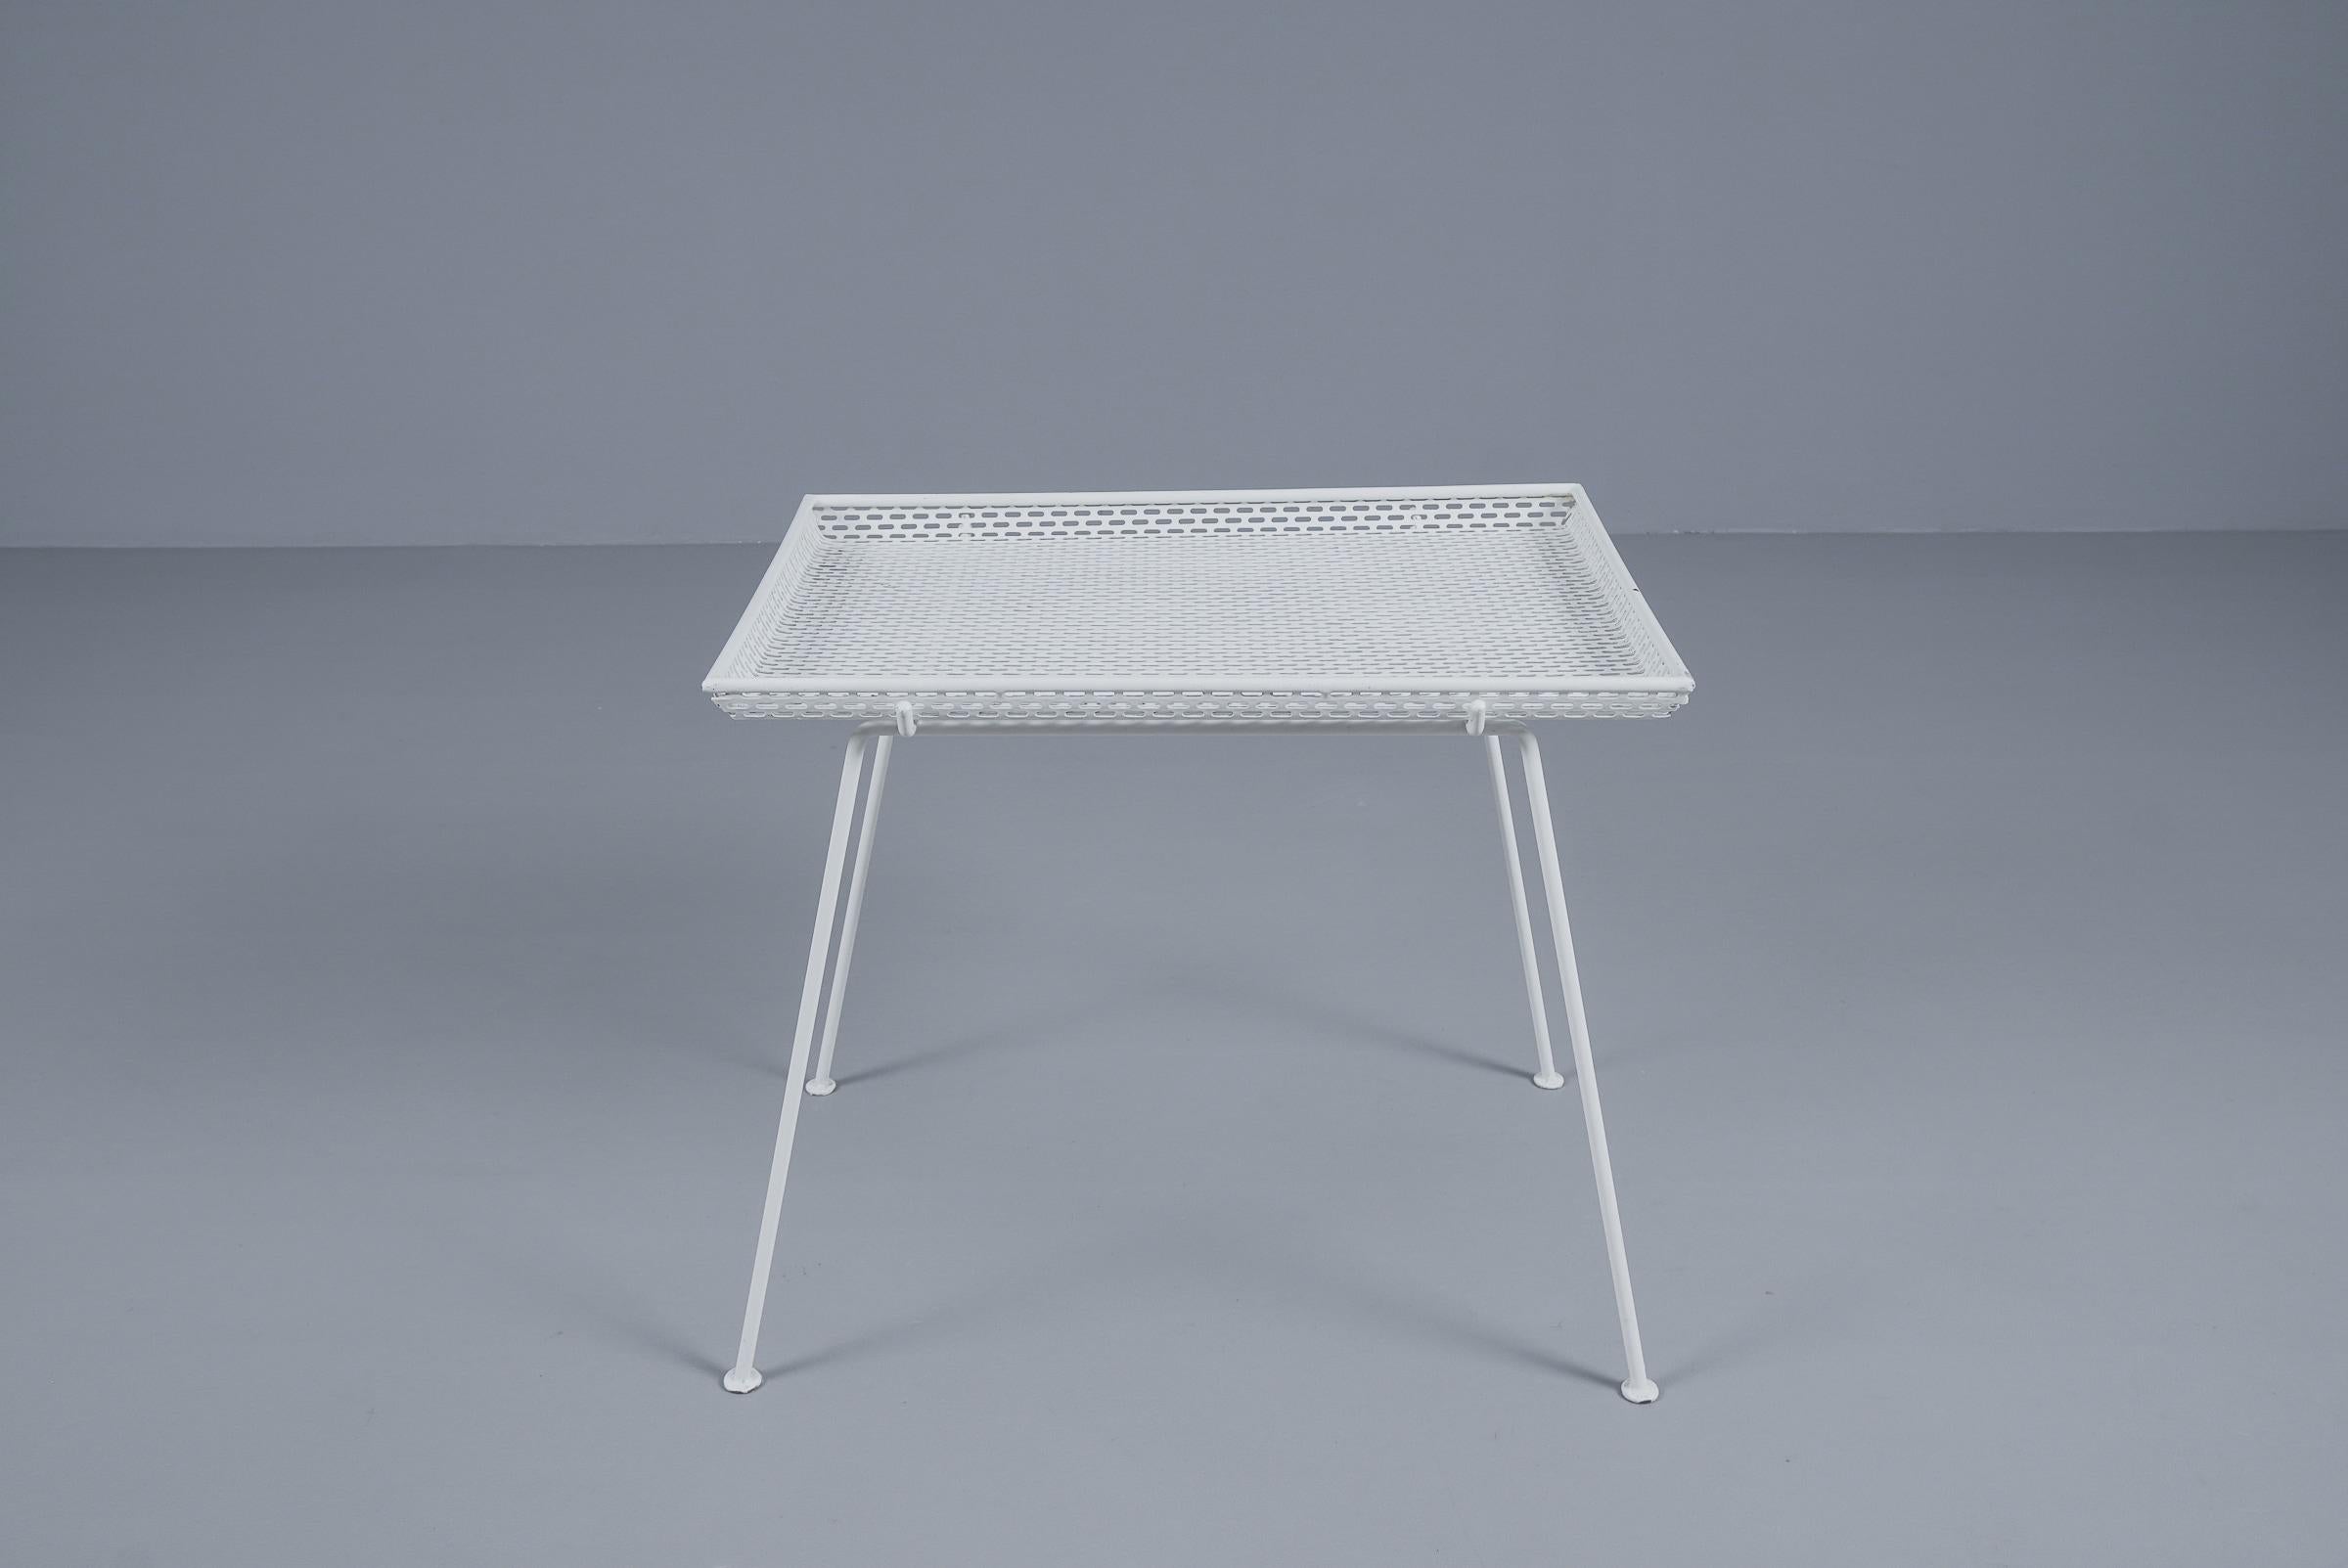 Mid-20th Century French Side Table in Perforated White Lacquered Metal With Removable Tray, 1950s For Sale